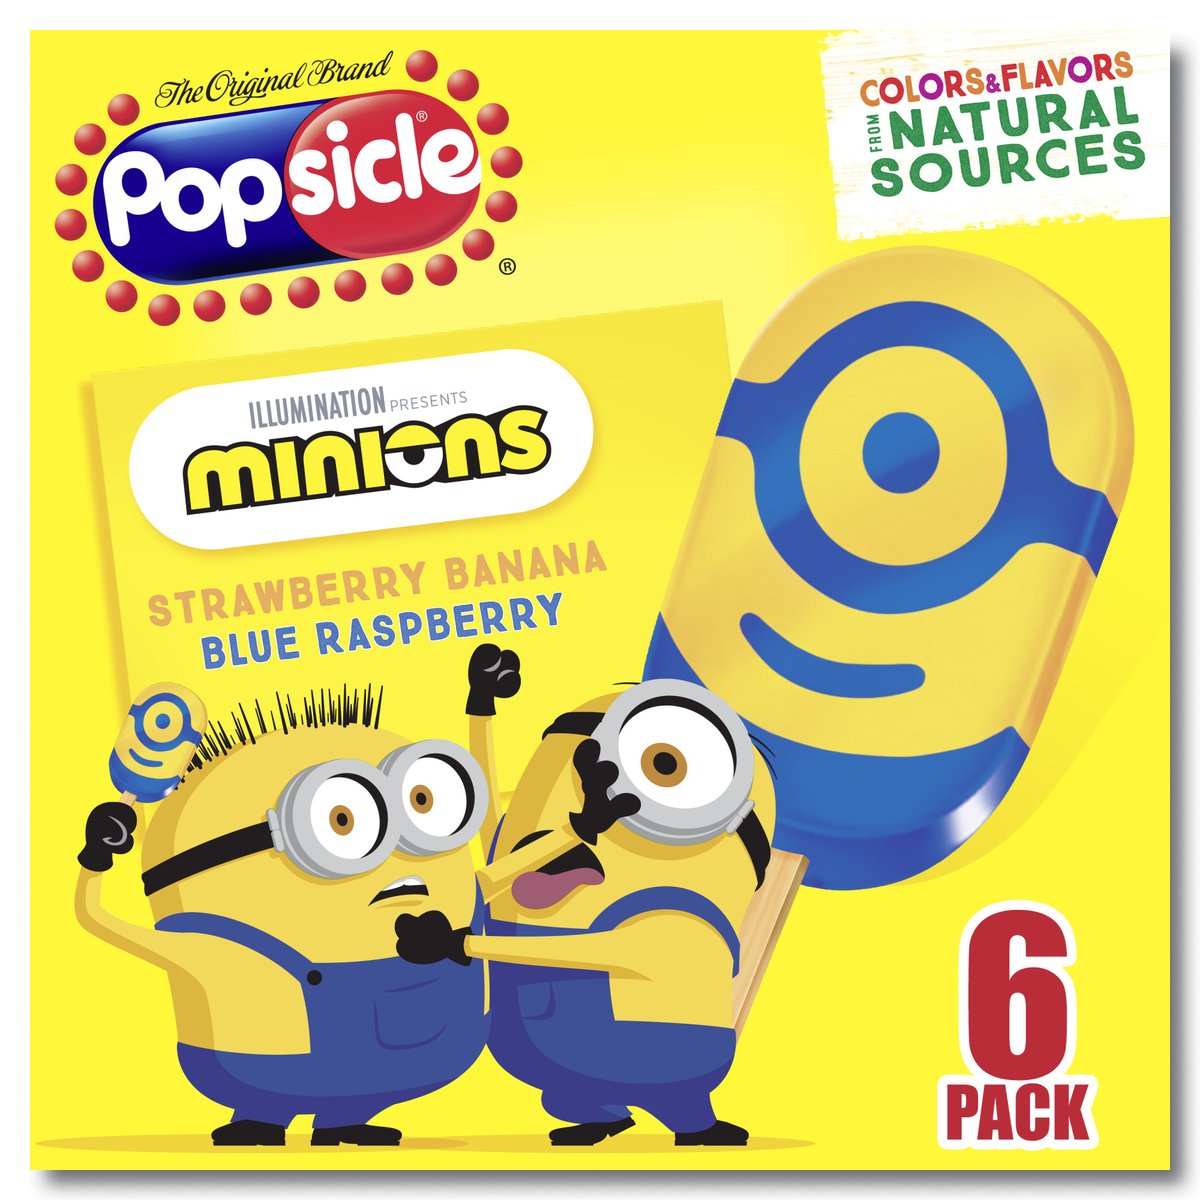 New Popsicle Coupons: Save on Spider-Man and Minions Frozen Treats {$2.47 per box at Walmart}!
https://t.co/i4dE14skSn https://t.co/8ZF2NkozwO